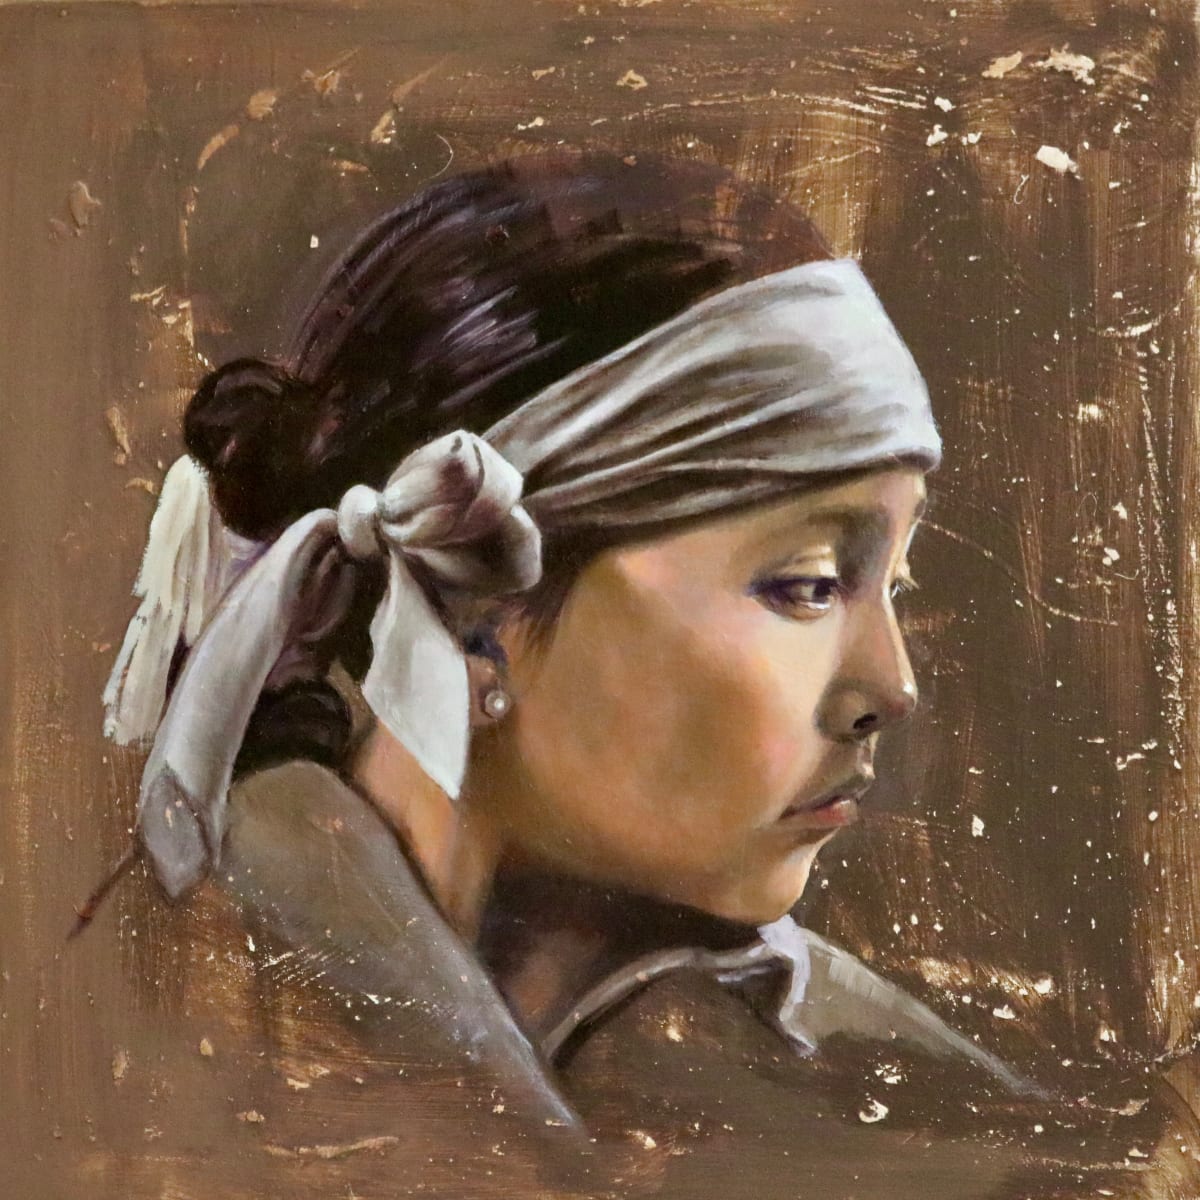 Star Boy - Eternal Youth by Karen Clarkson  Image: Contemporary portrait of young Navajo boy